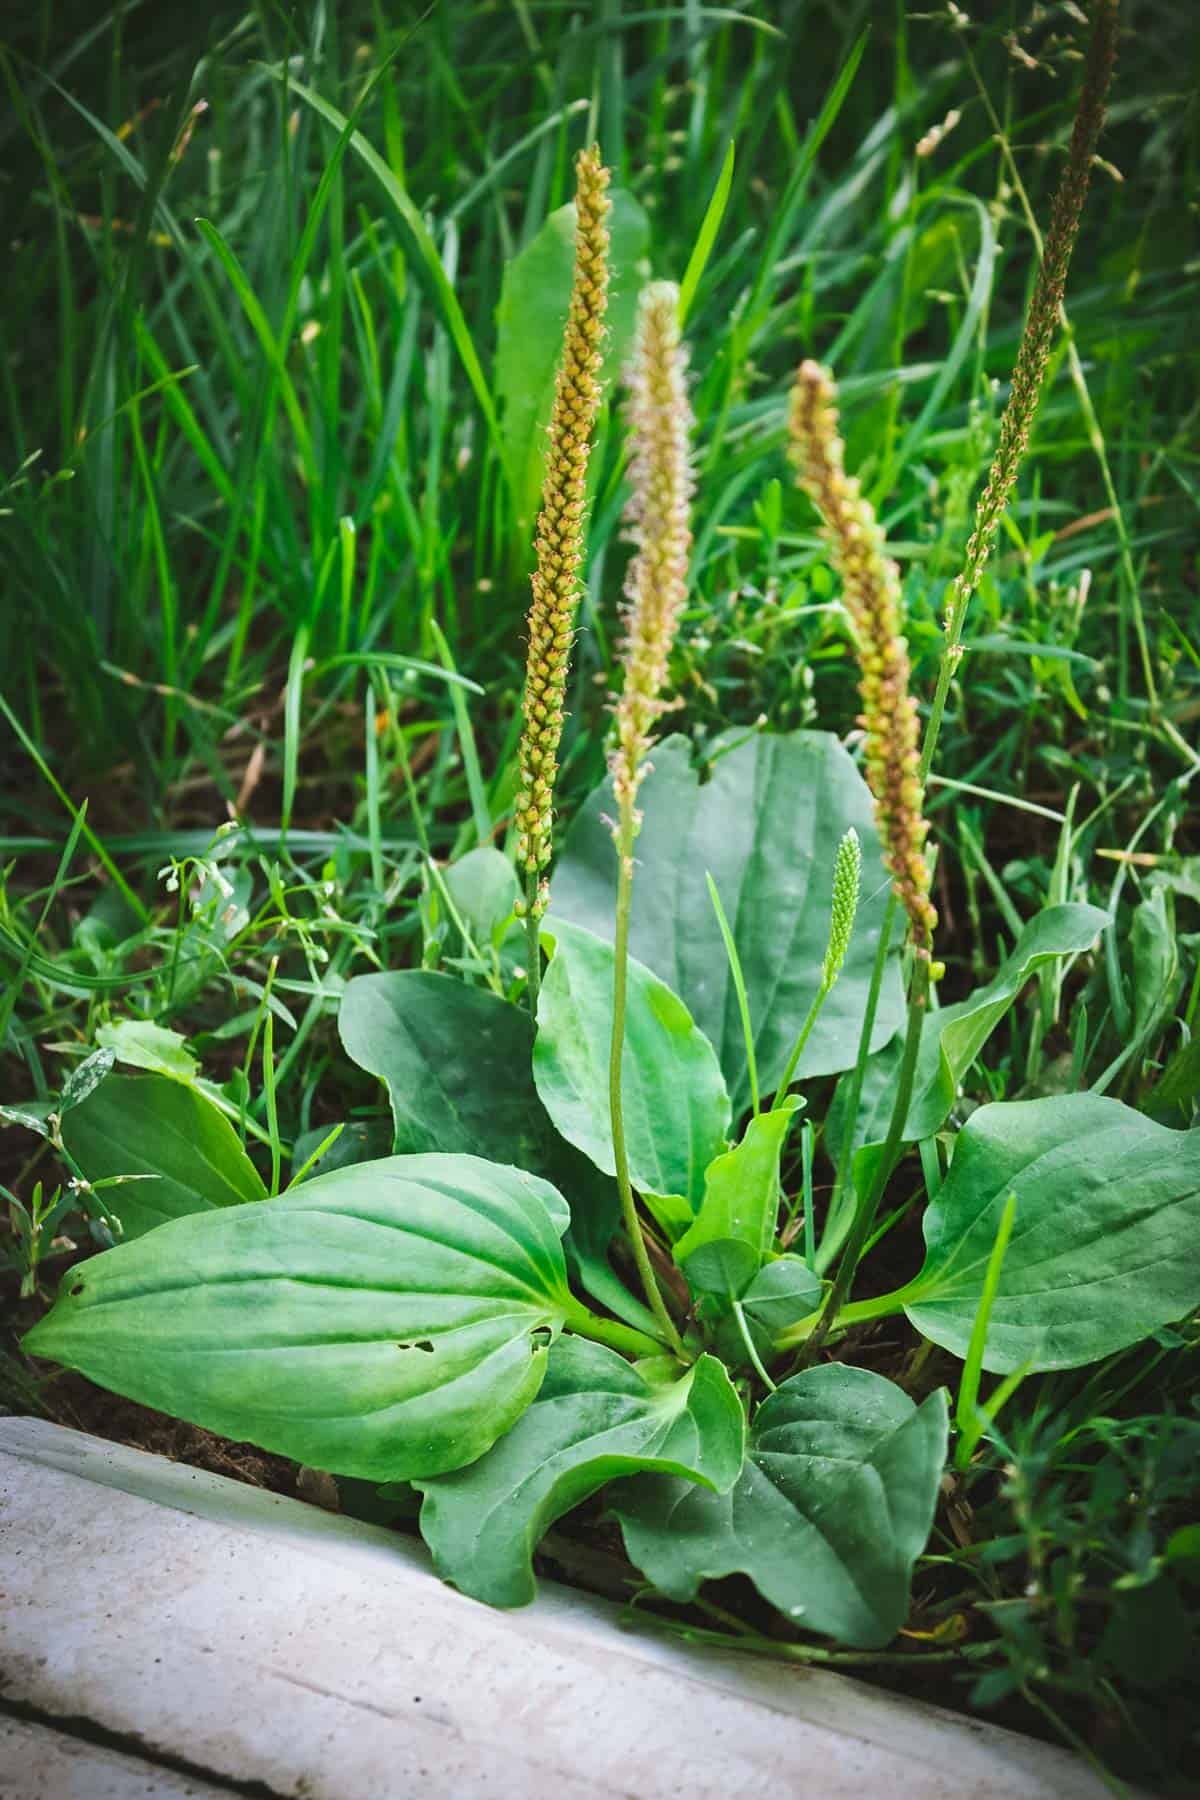 Broadleaf plantain growing in a grassy area.